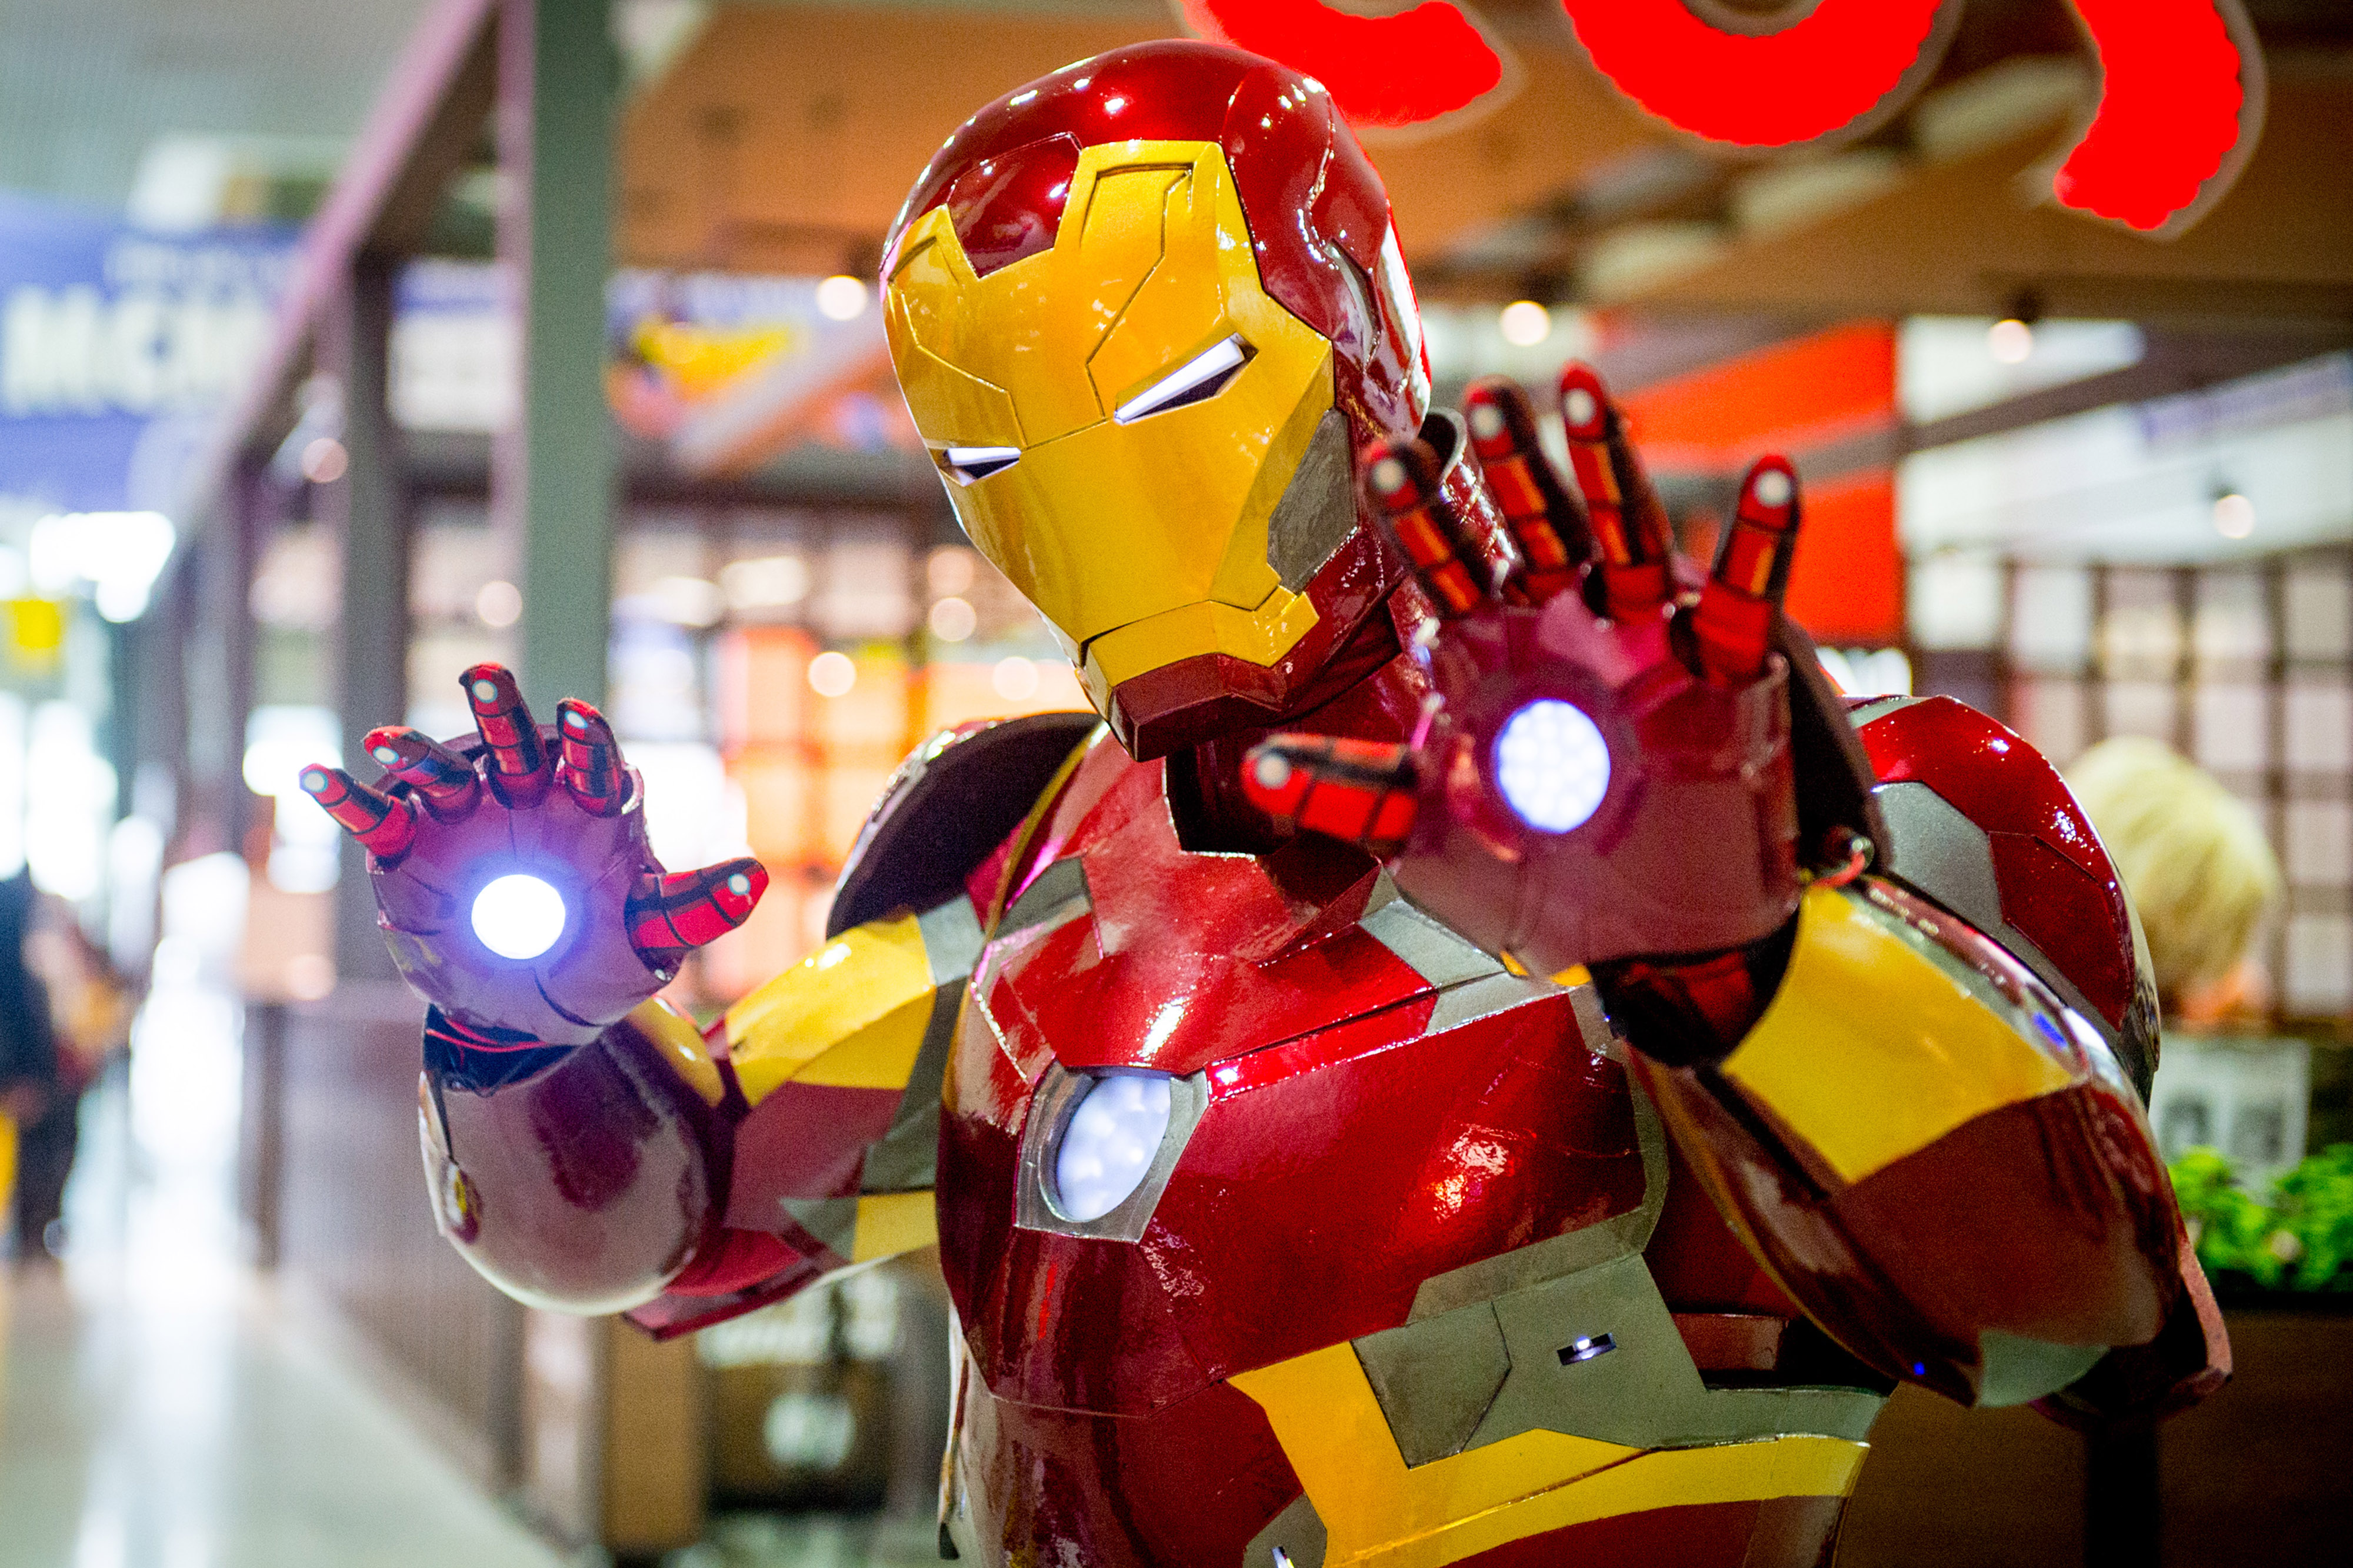 A cosplayer dresses up as Iron Man, who might be seen as Superior Iron Man in the 'Doctor Strange in the Multiverse of Madness' trailer, during a convention.